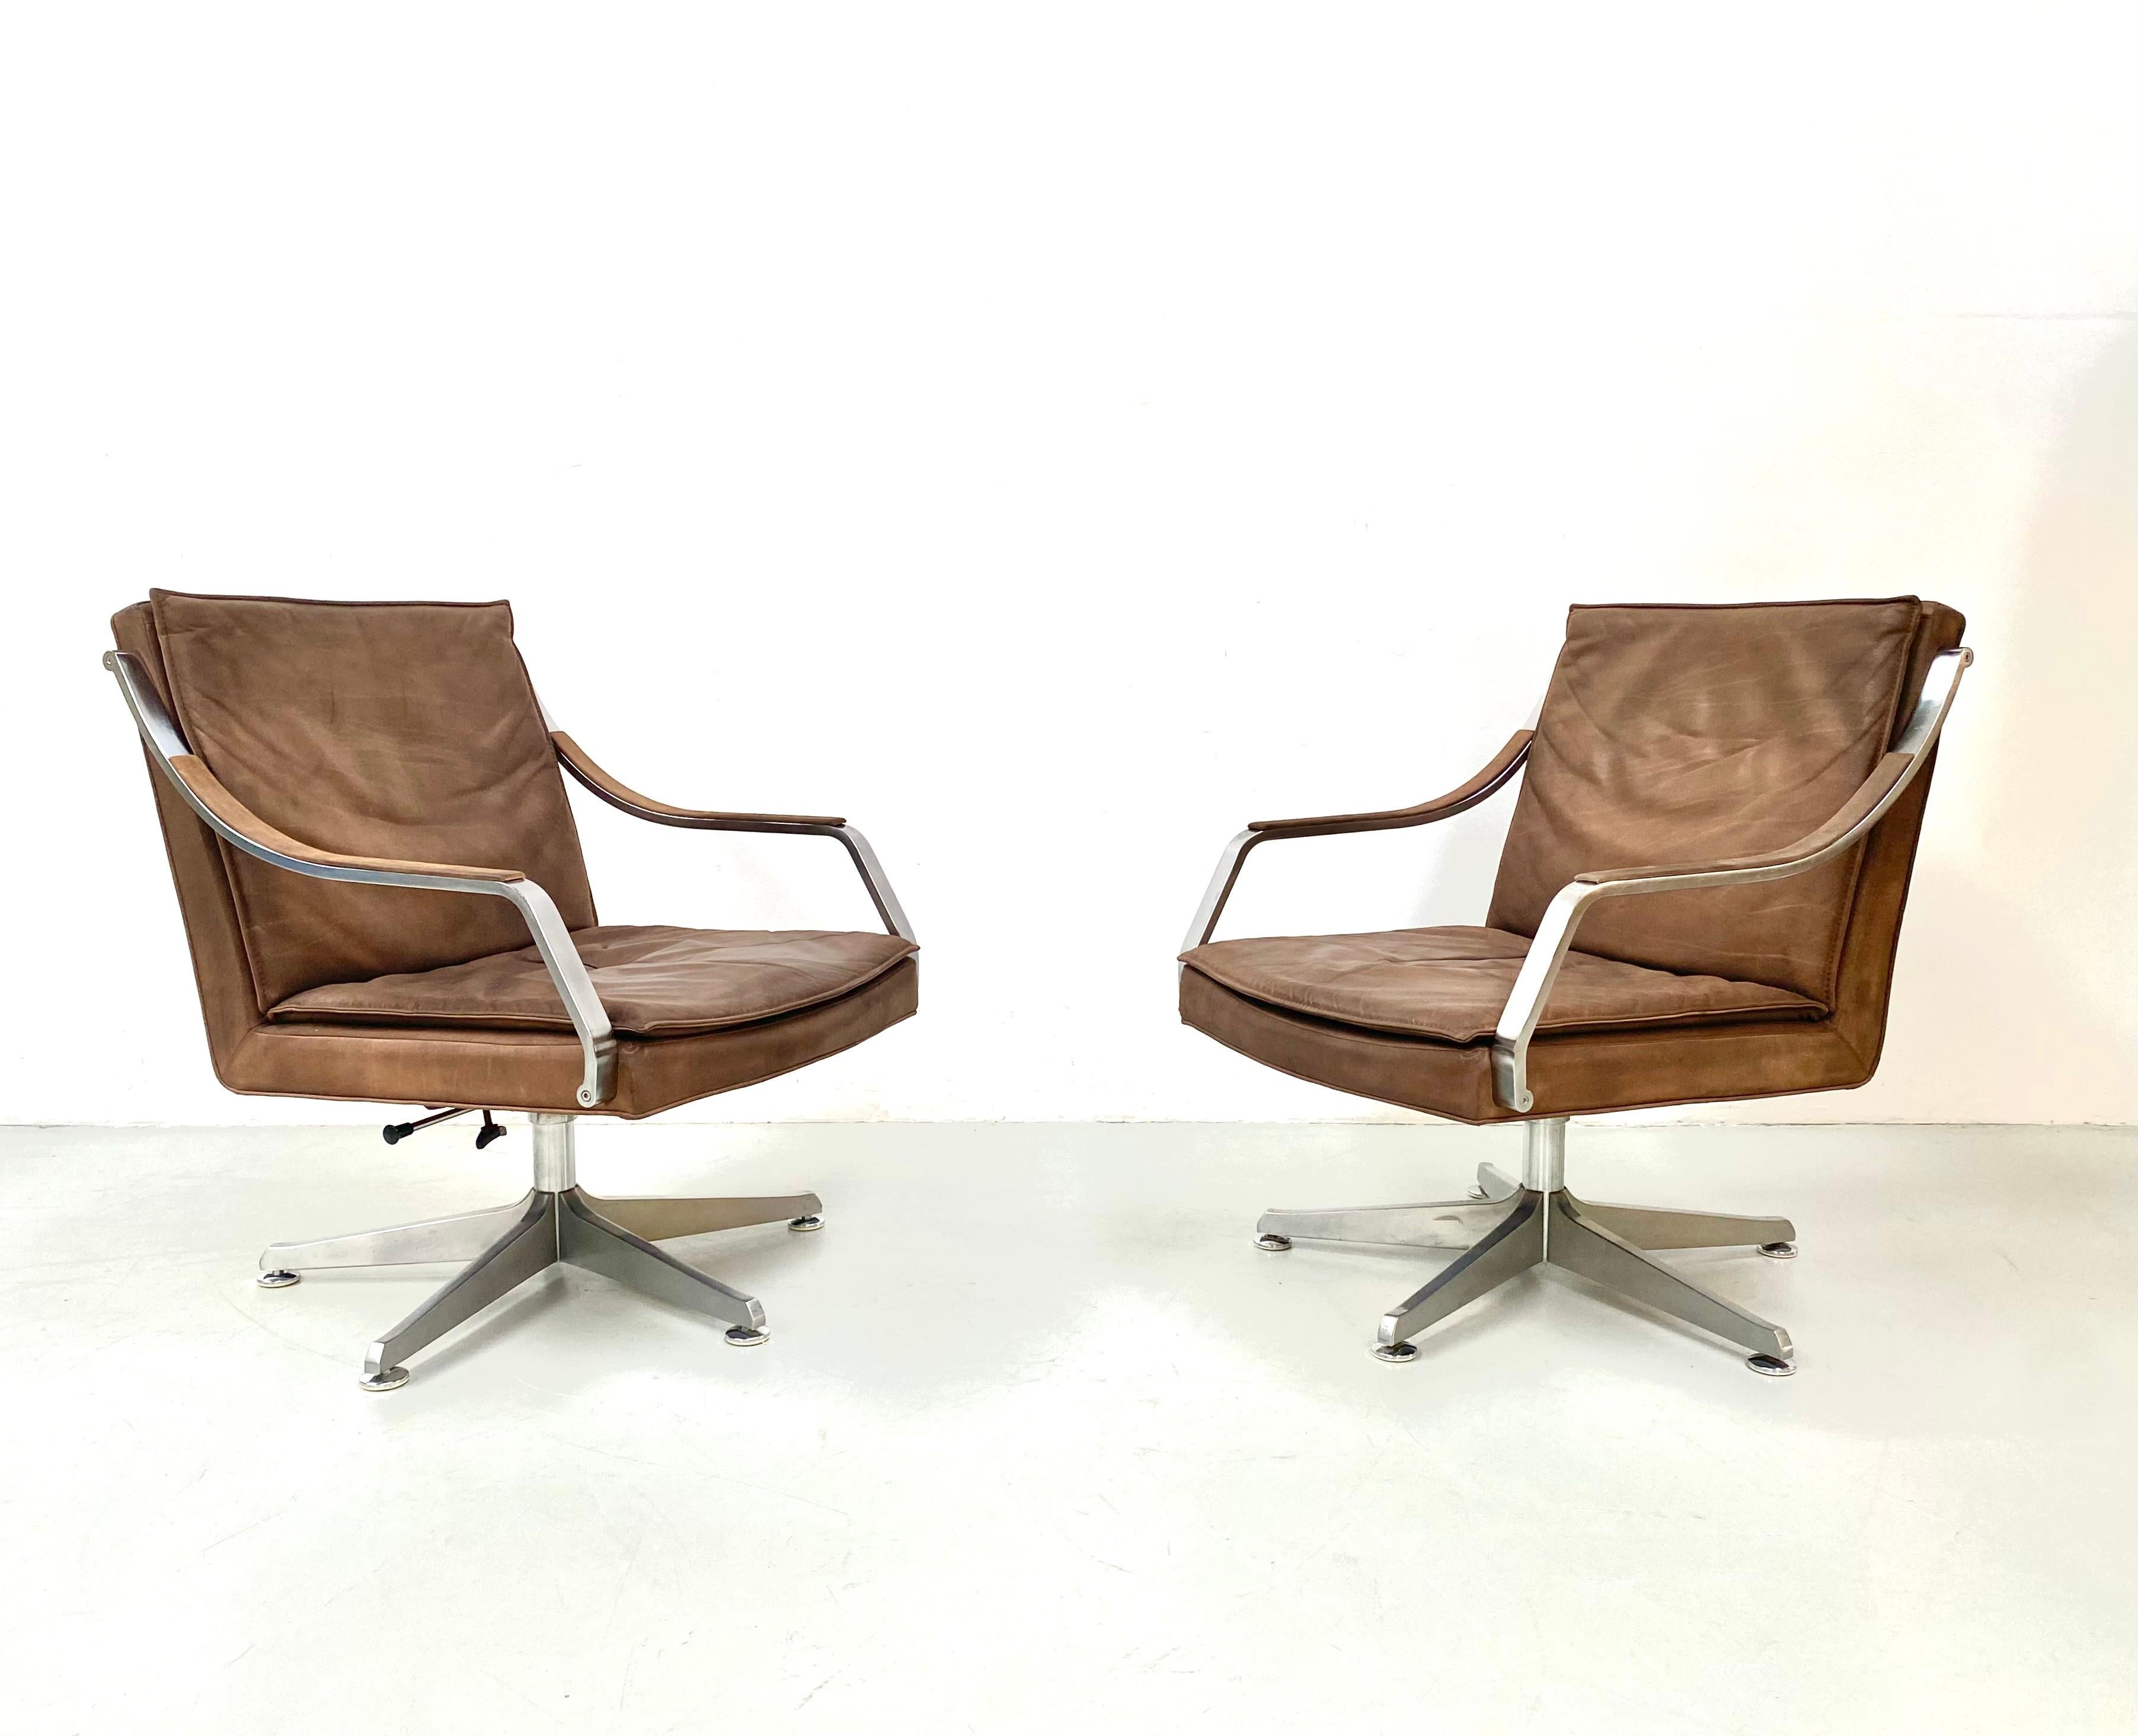 This set of 2 brown leather conference chairs from the art collection, designed by Rudolf B. Glatzel for Dreipunkt and Knoll in the 80s, is in very good condition. The dark brown leather shows only slight signs of wear, the stainless steel feet are